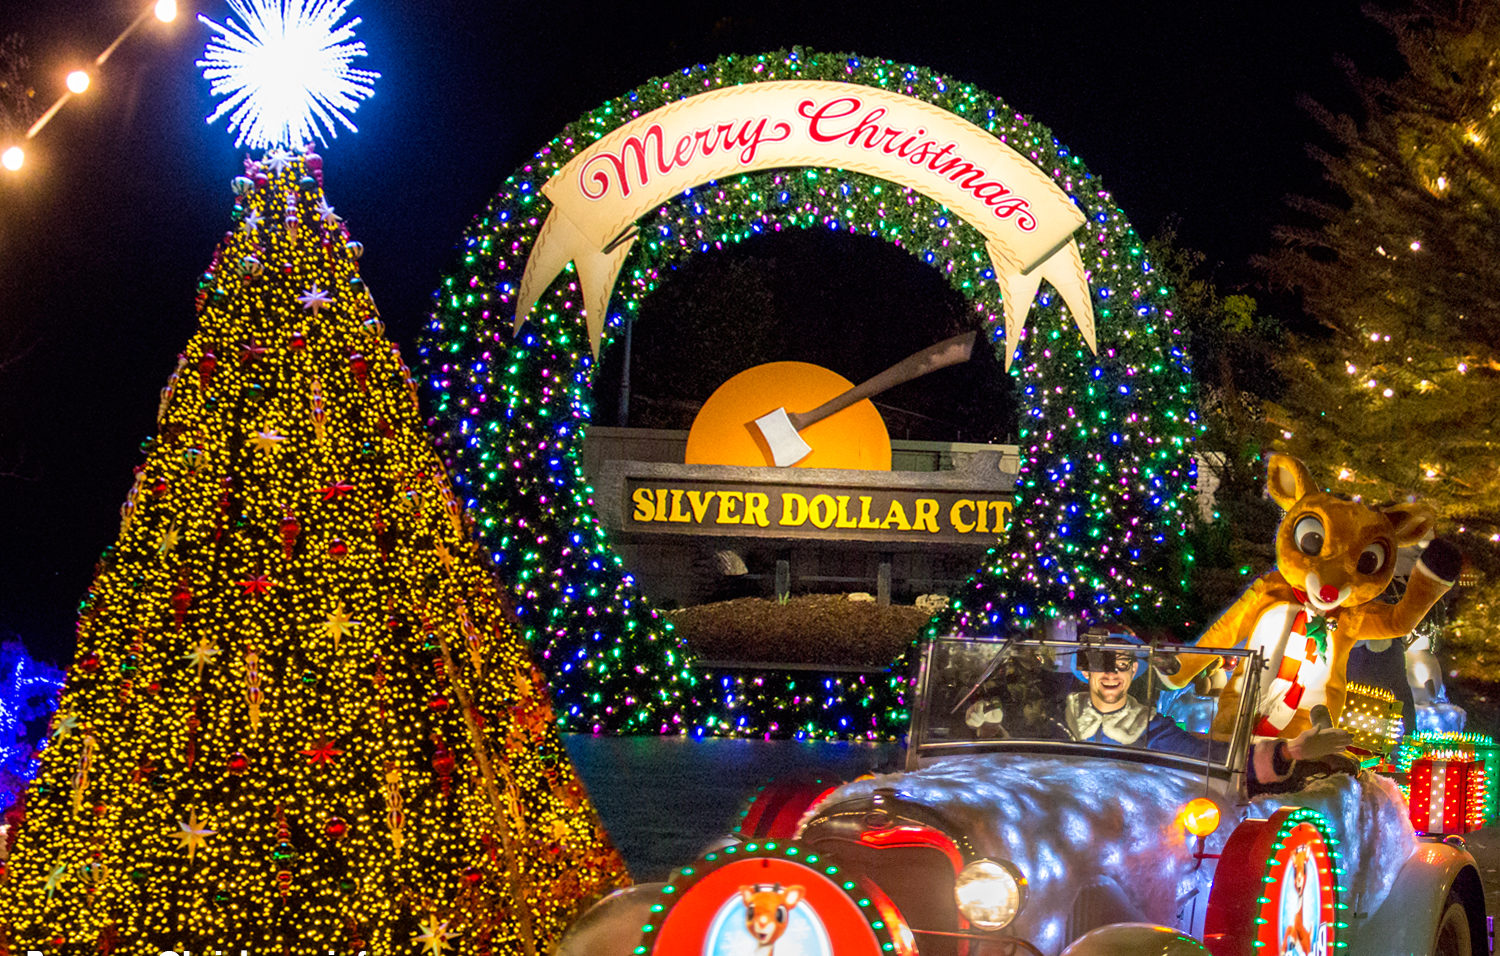 The Best Places to see Christmas Lights in Branson